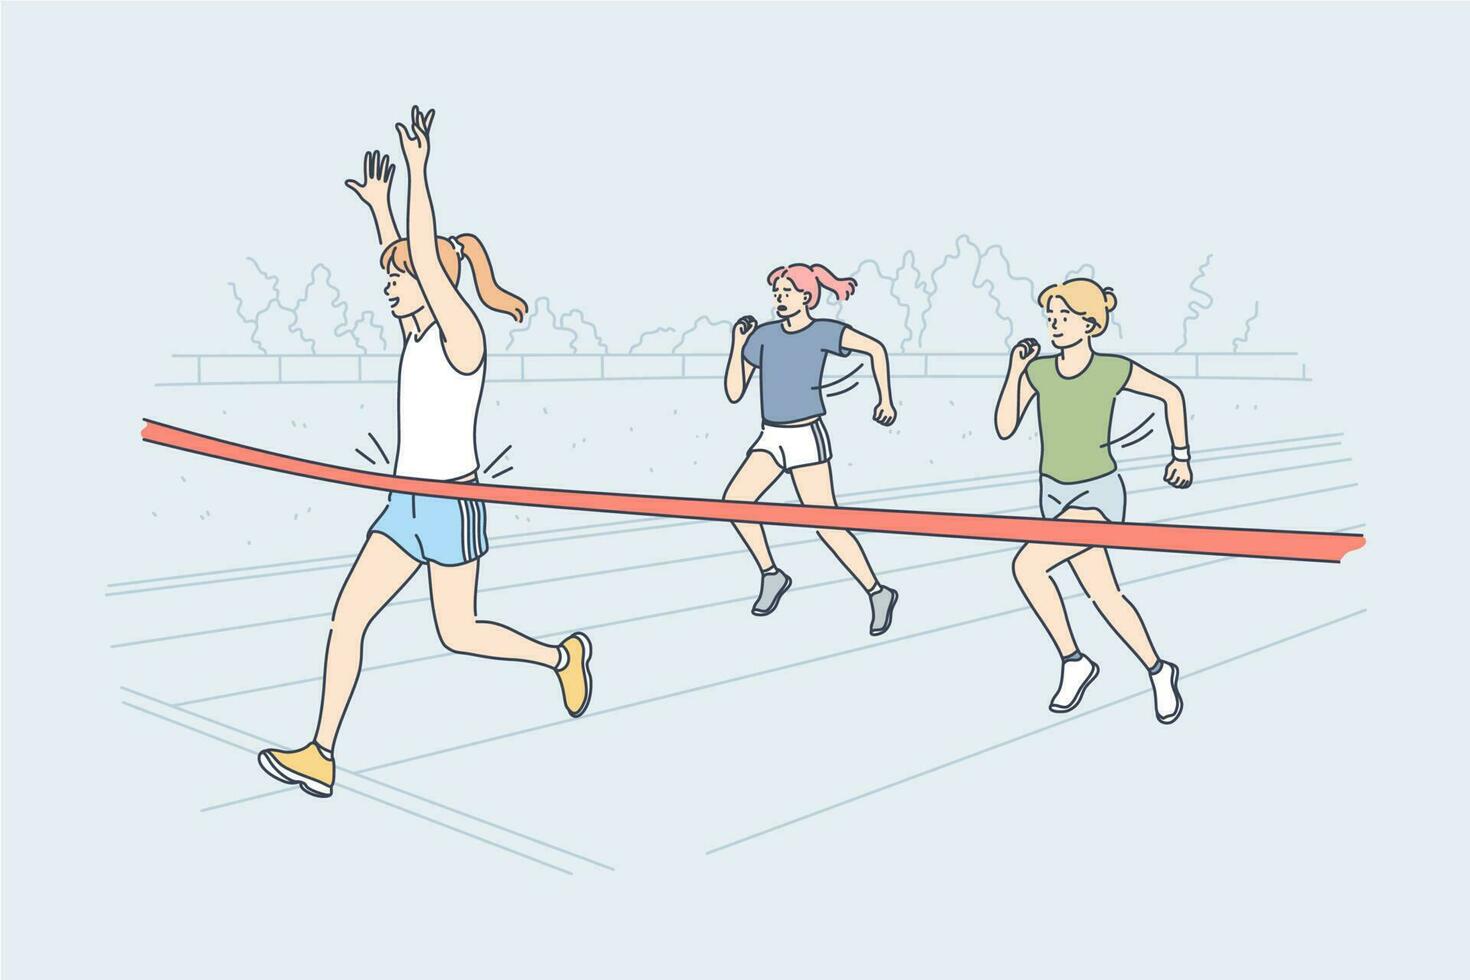 Triumph, sport, victory, success, competition concept. Young happy excited smiling woman girl athlete runner crosses finish red line with ribbon first and winning race. Goal achievement illustration. vector